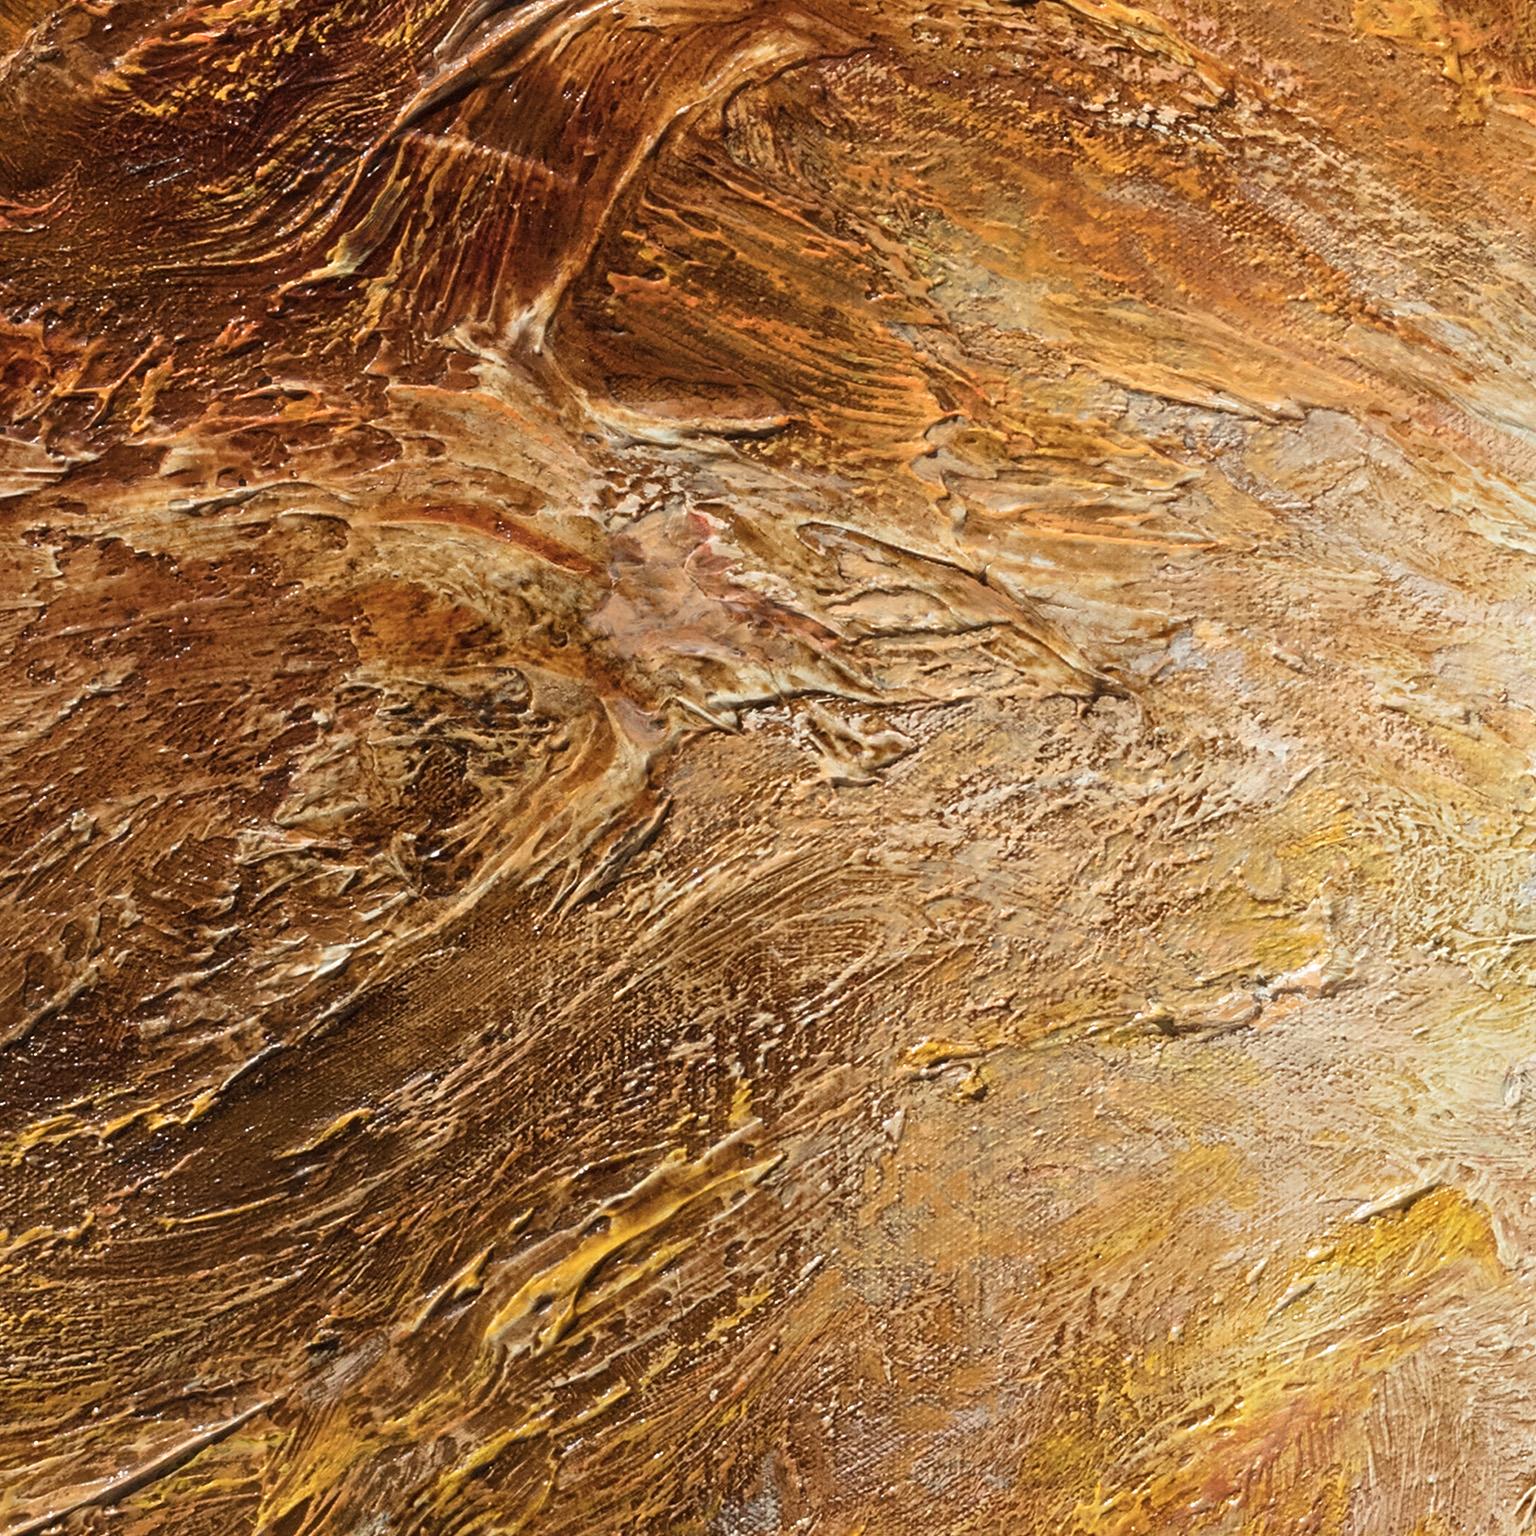 Birth of Light - Abstract Gestural Oil Painting with Orange and Yellow Colors - Brown Landscape Painting by Ruggero Vanni